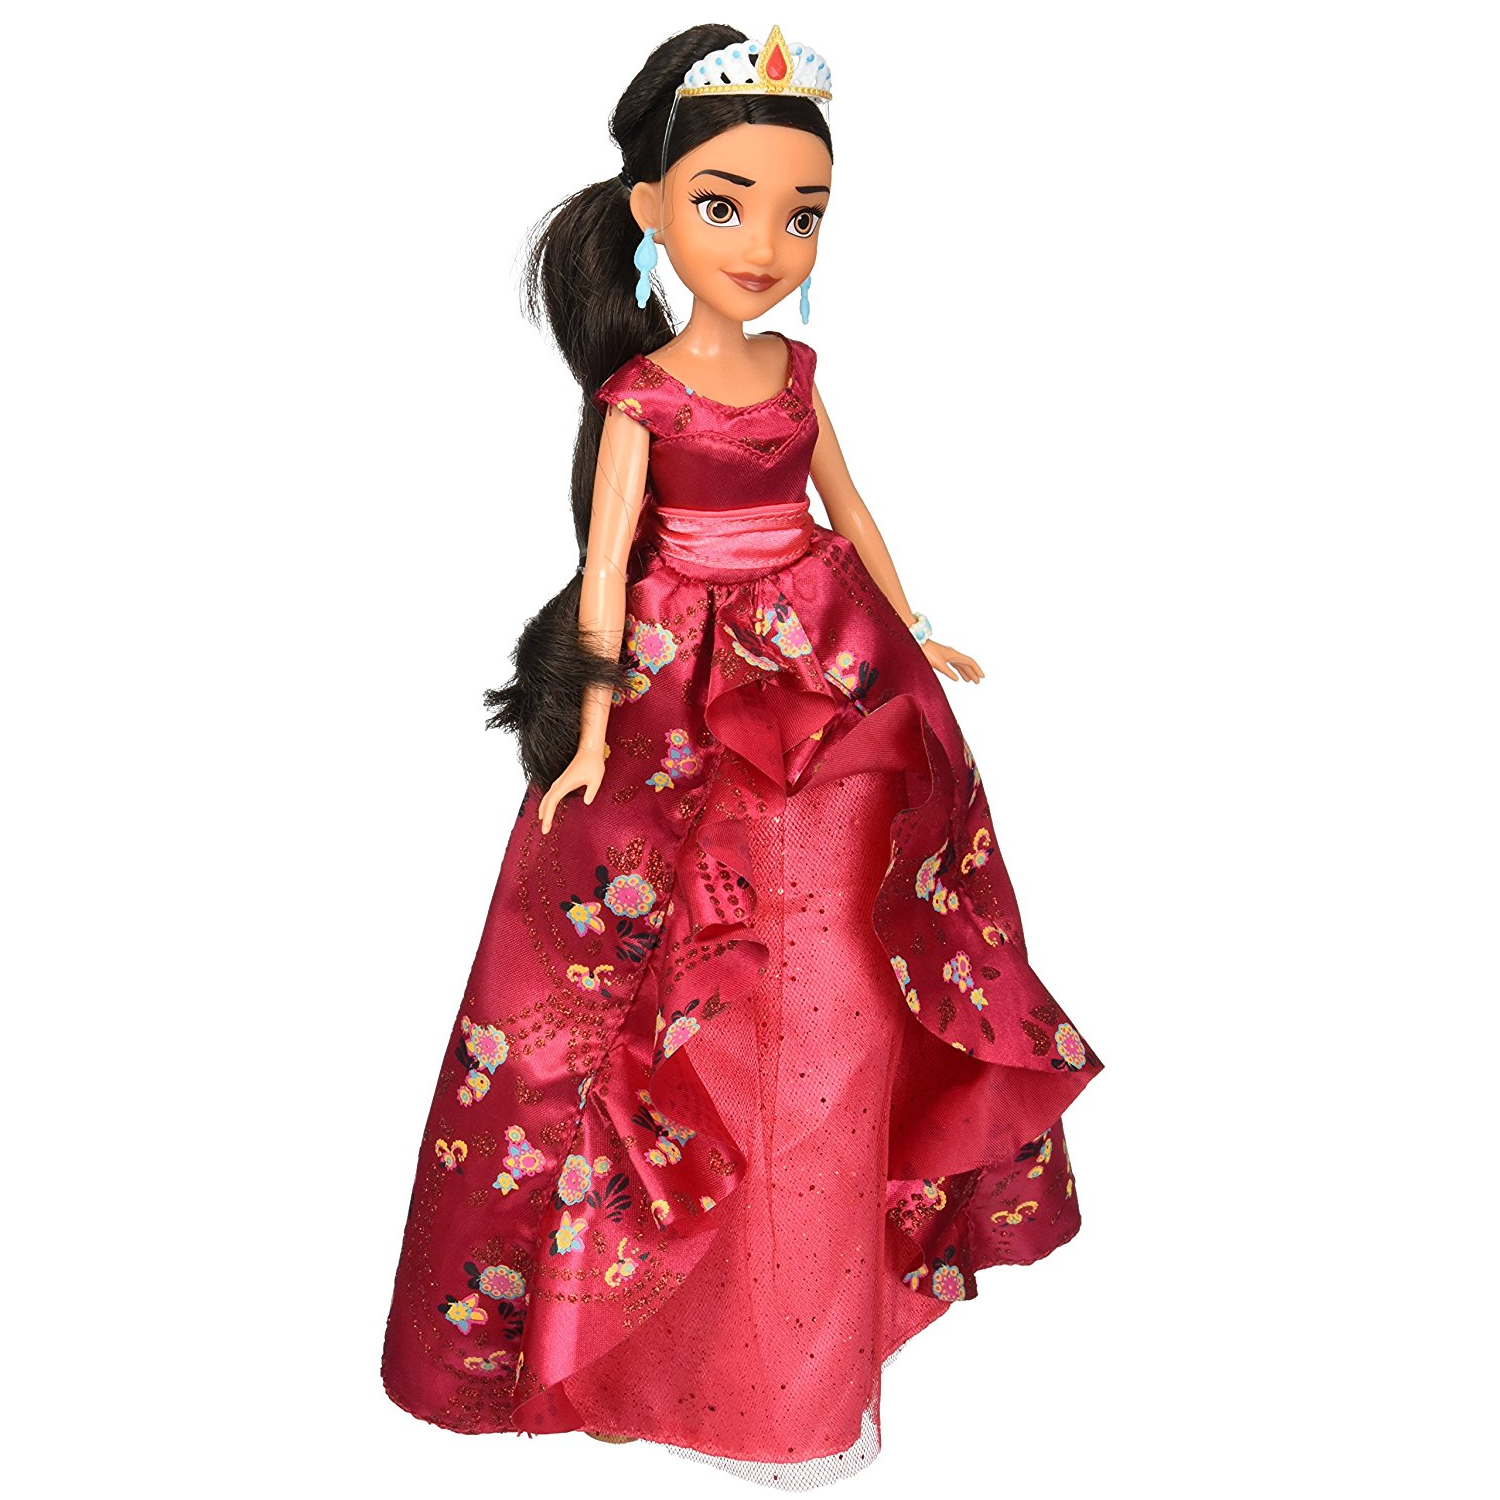 Amazon: Disney Elena of Avalor Royal Gown Doll Just $8.99!